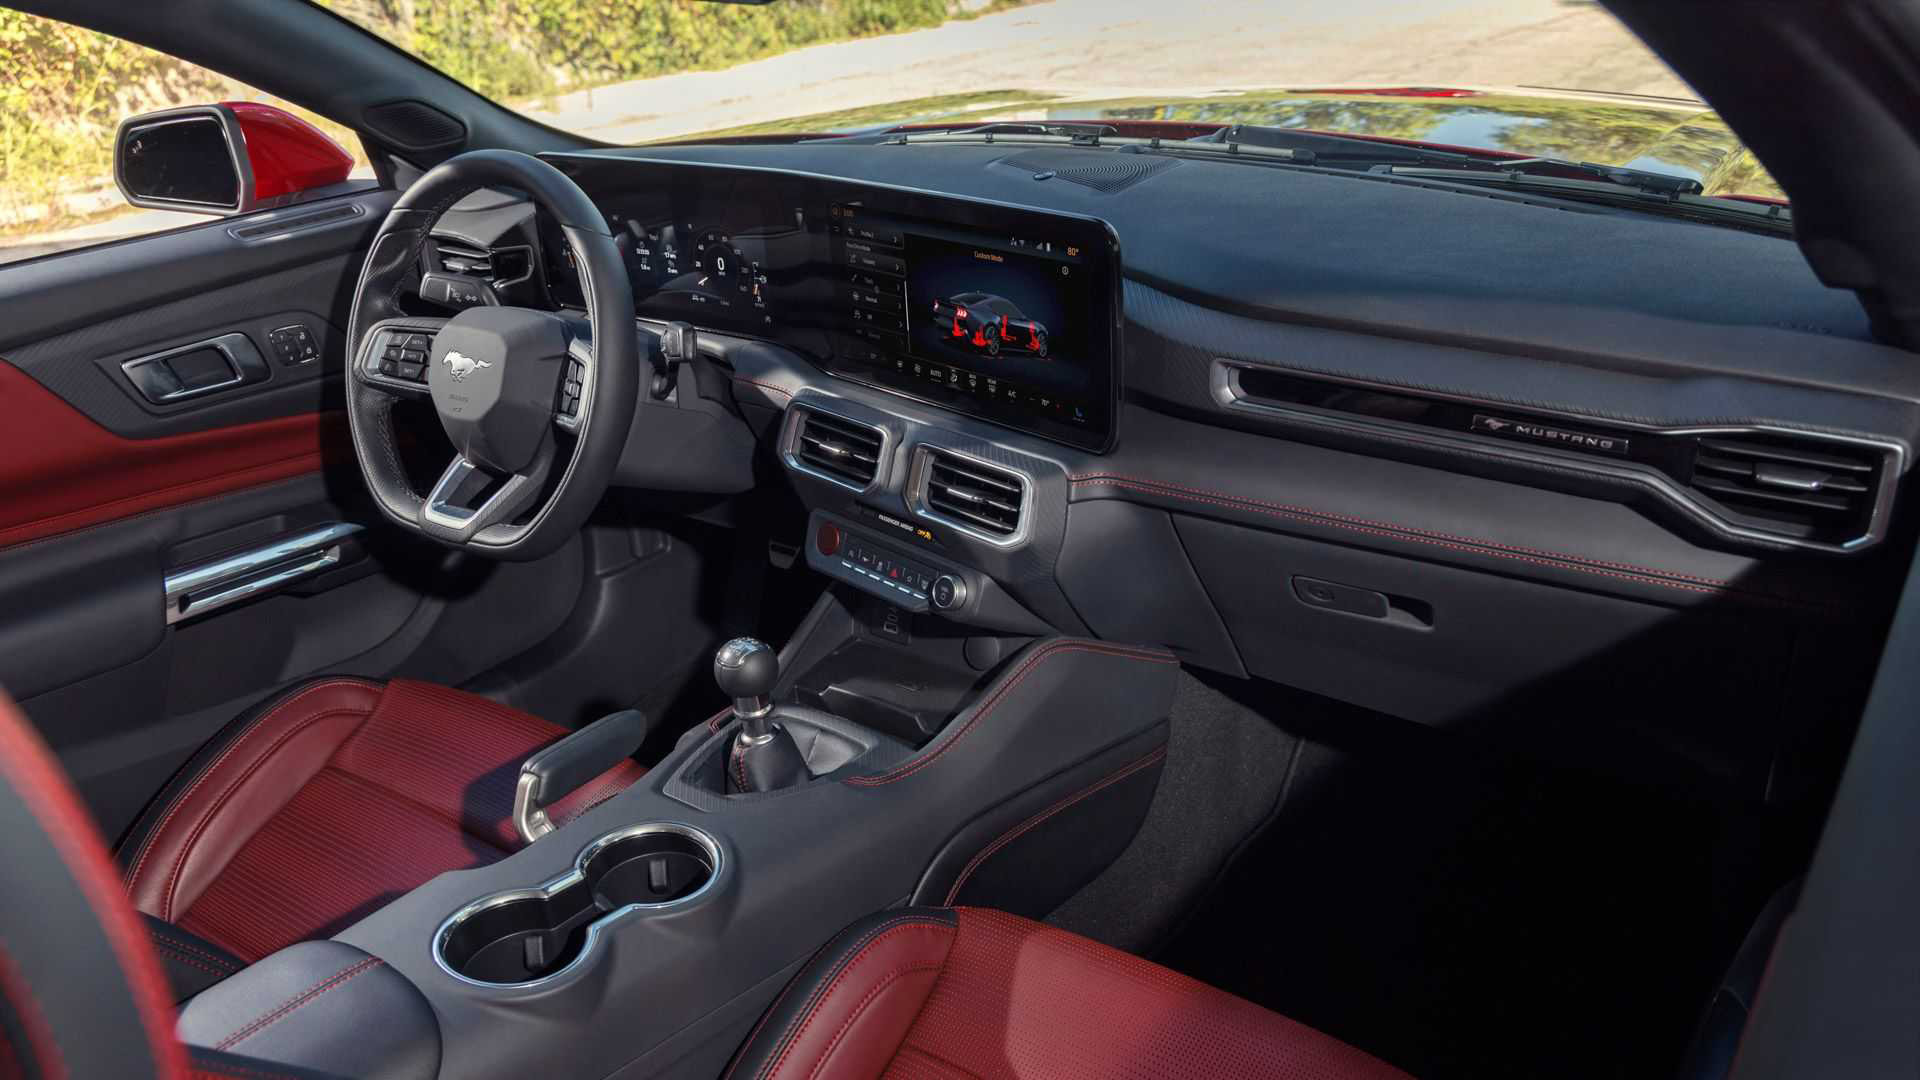 The interior is classic, though with plenty of screen surface, modern can't be avoided